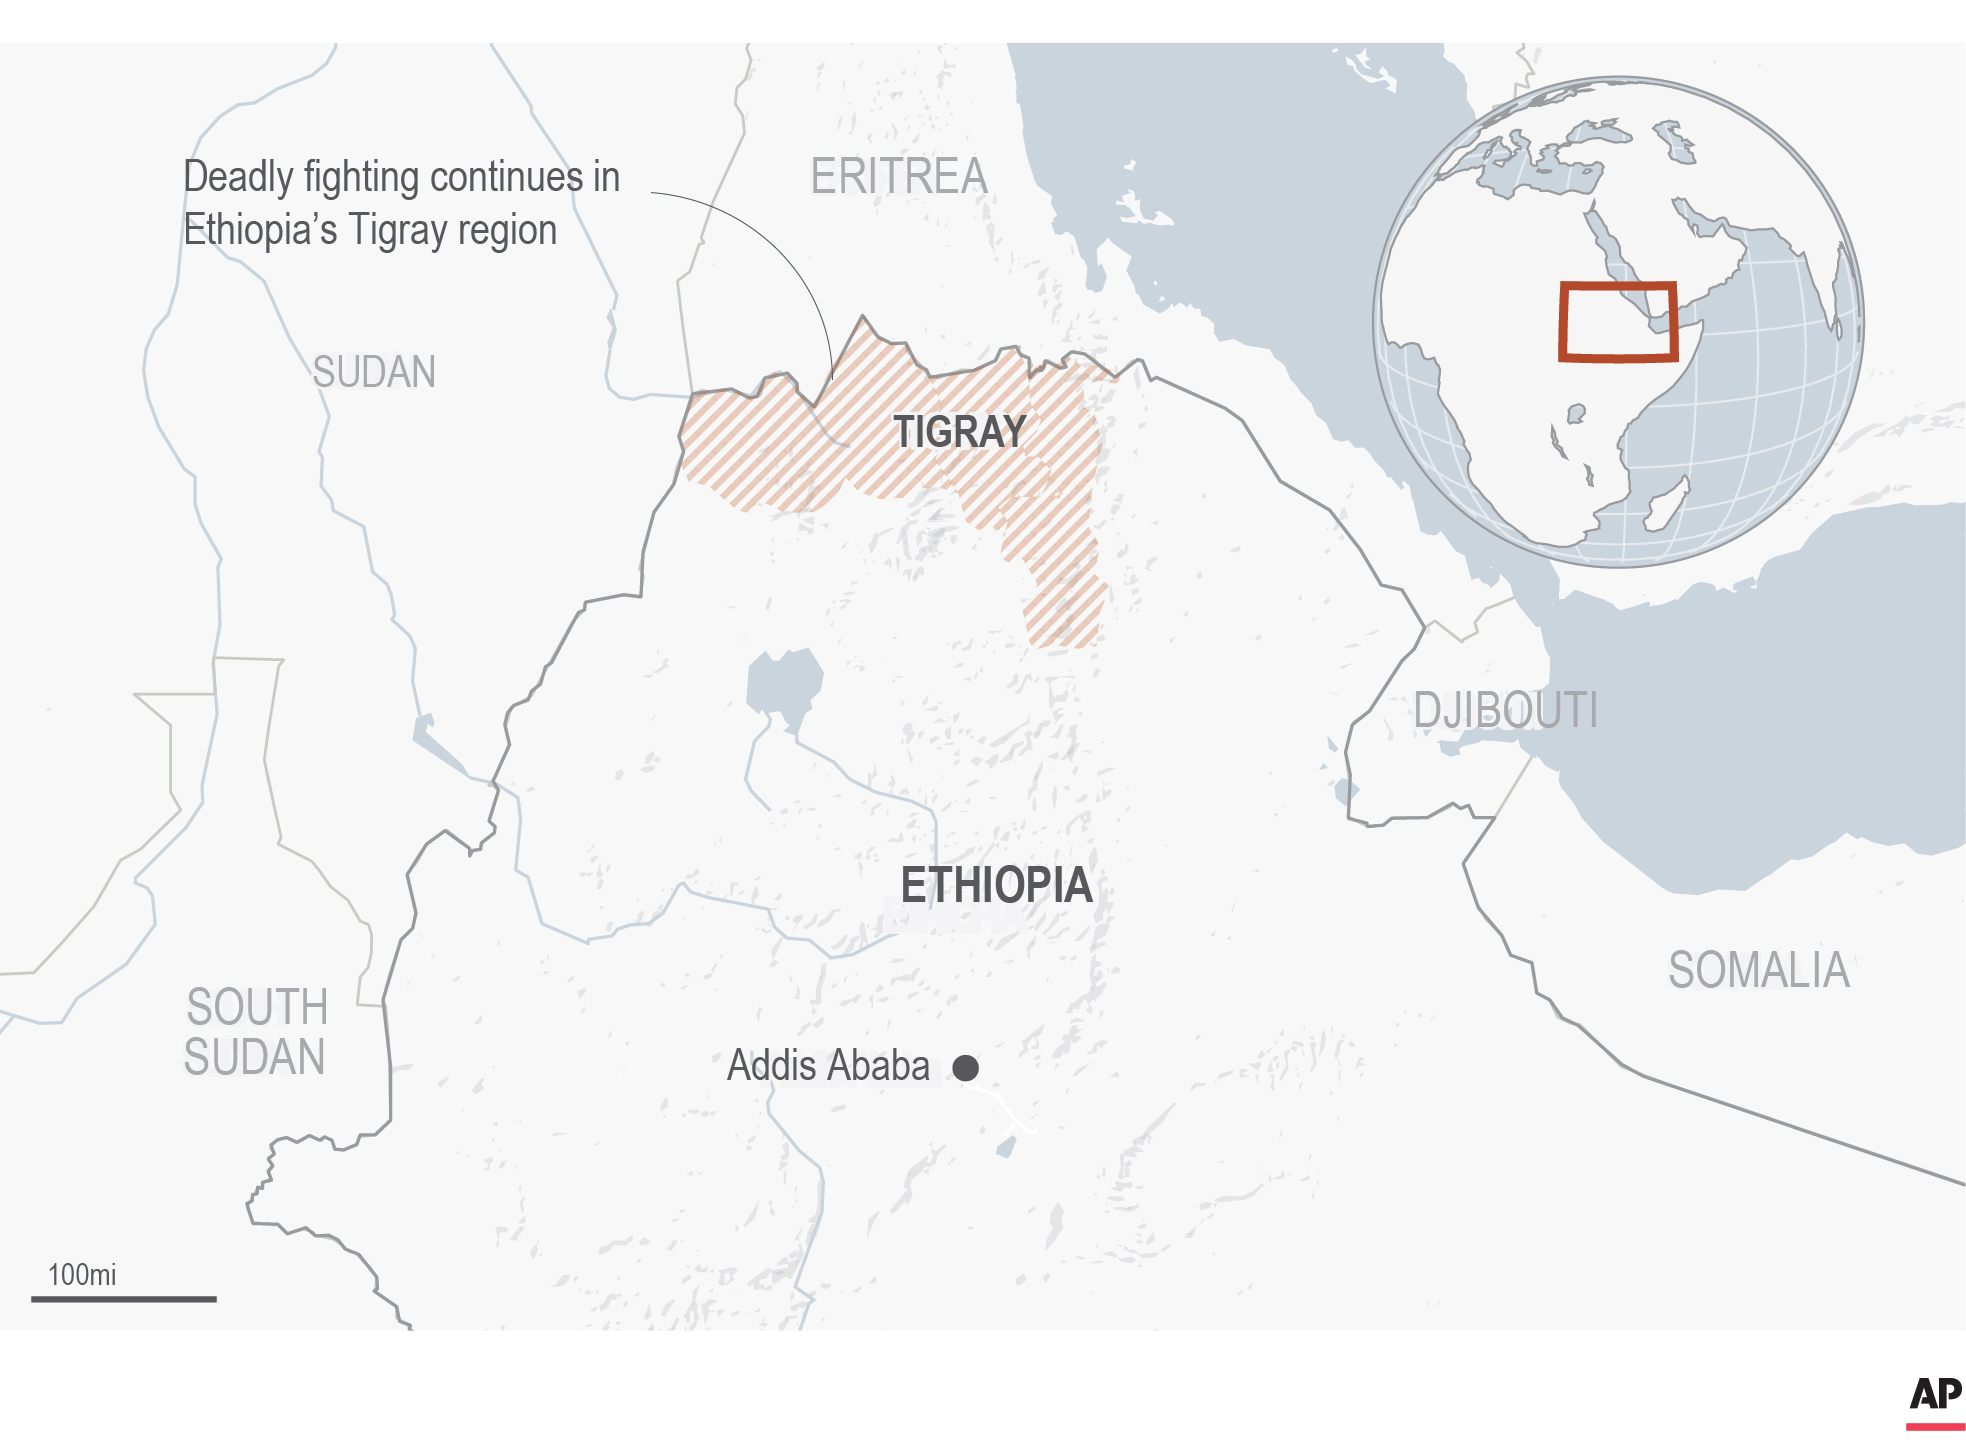 Diplomats Rockets Fired At Eritrea Amid Ethiopian Conflict